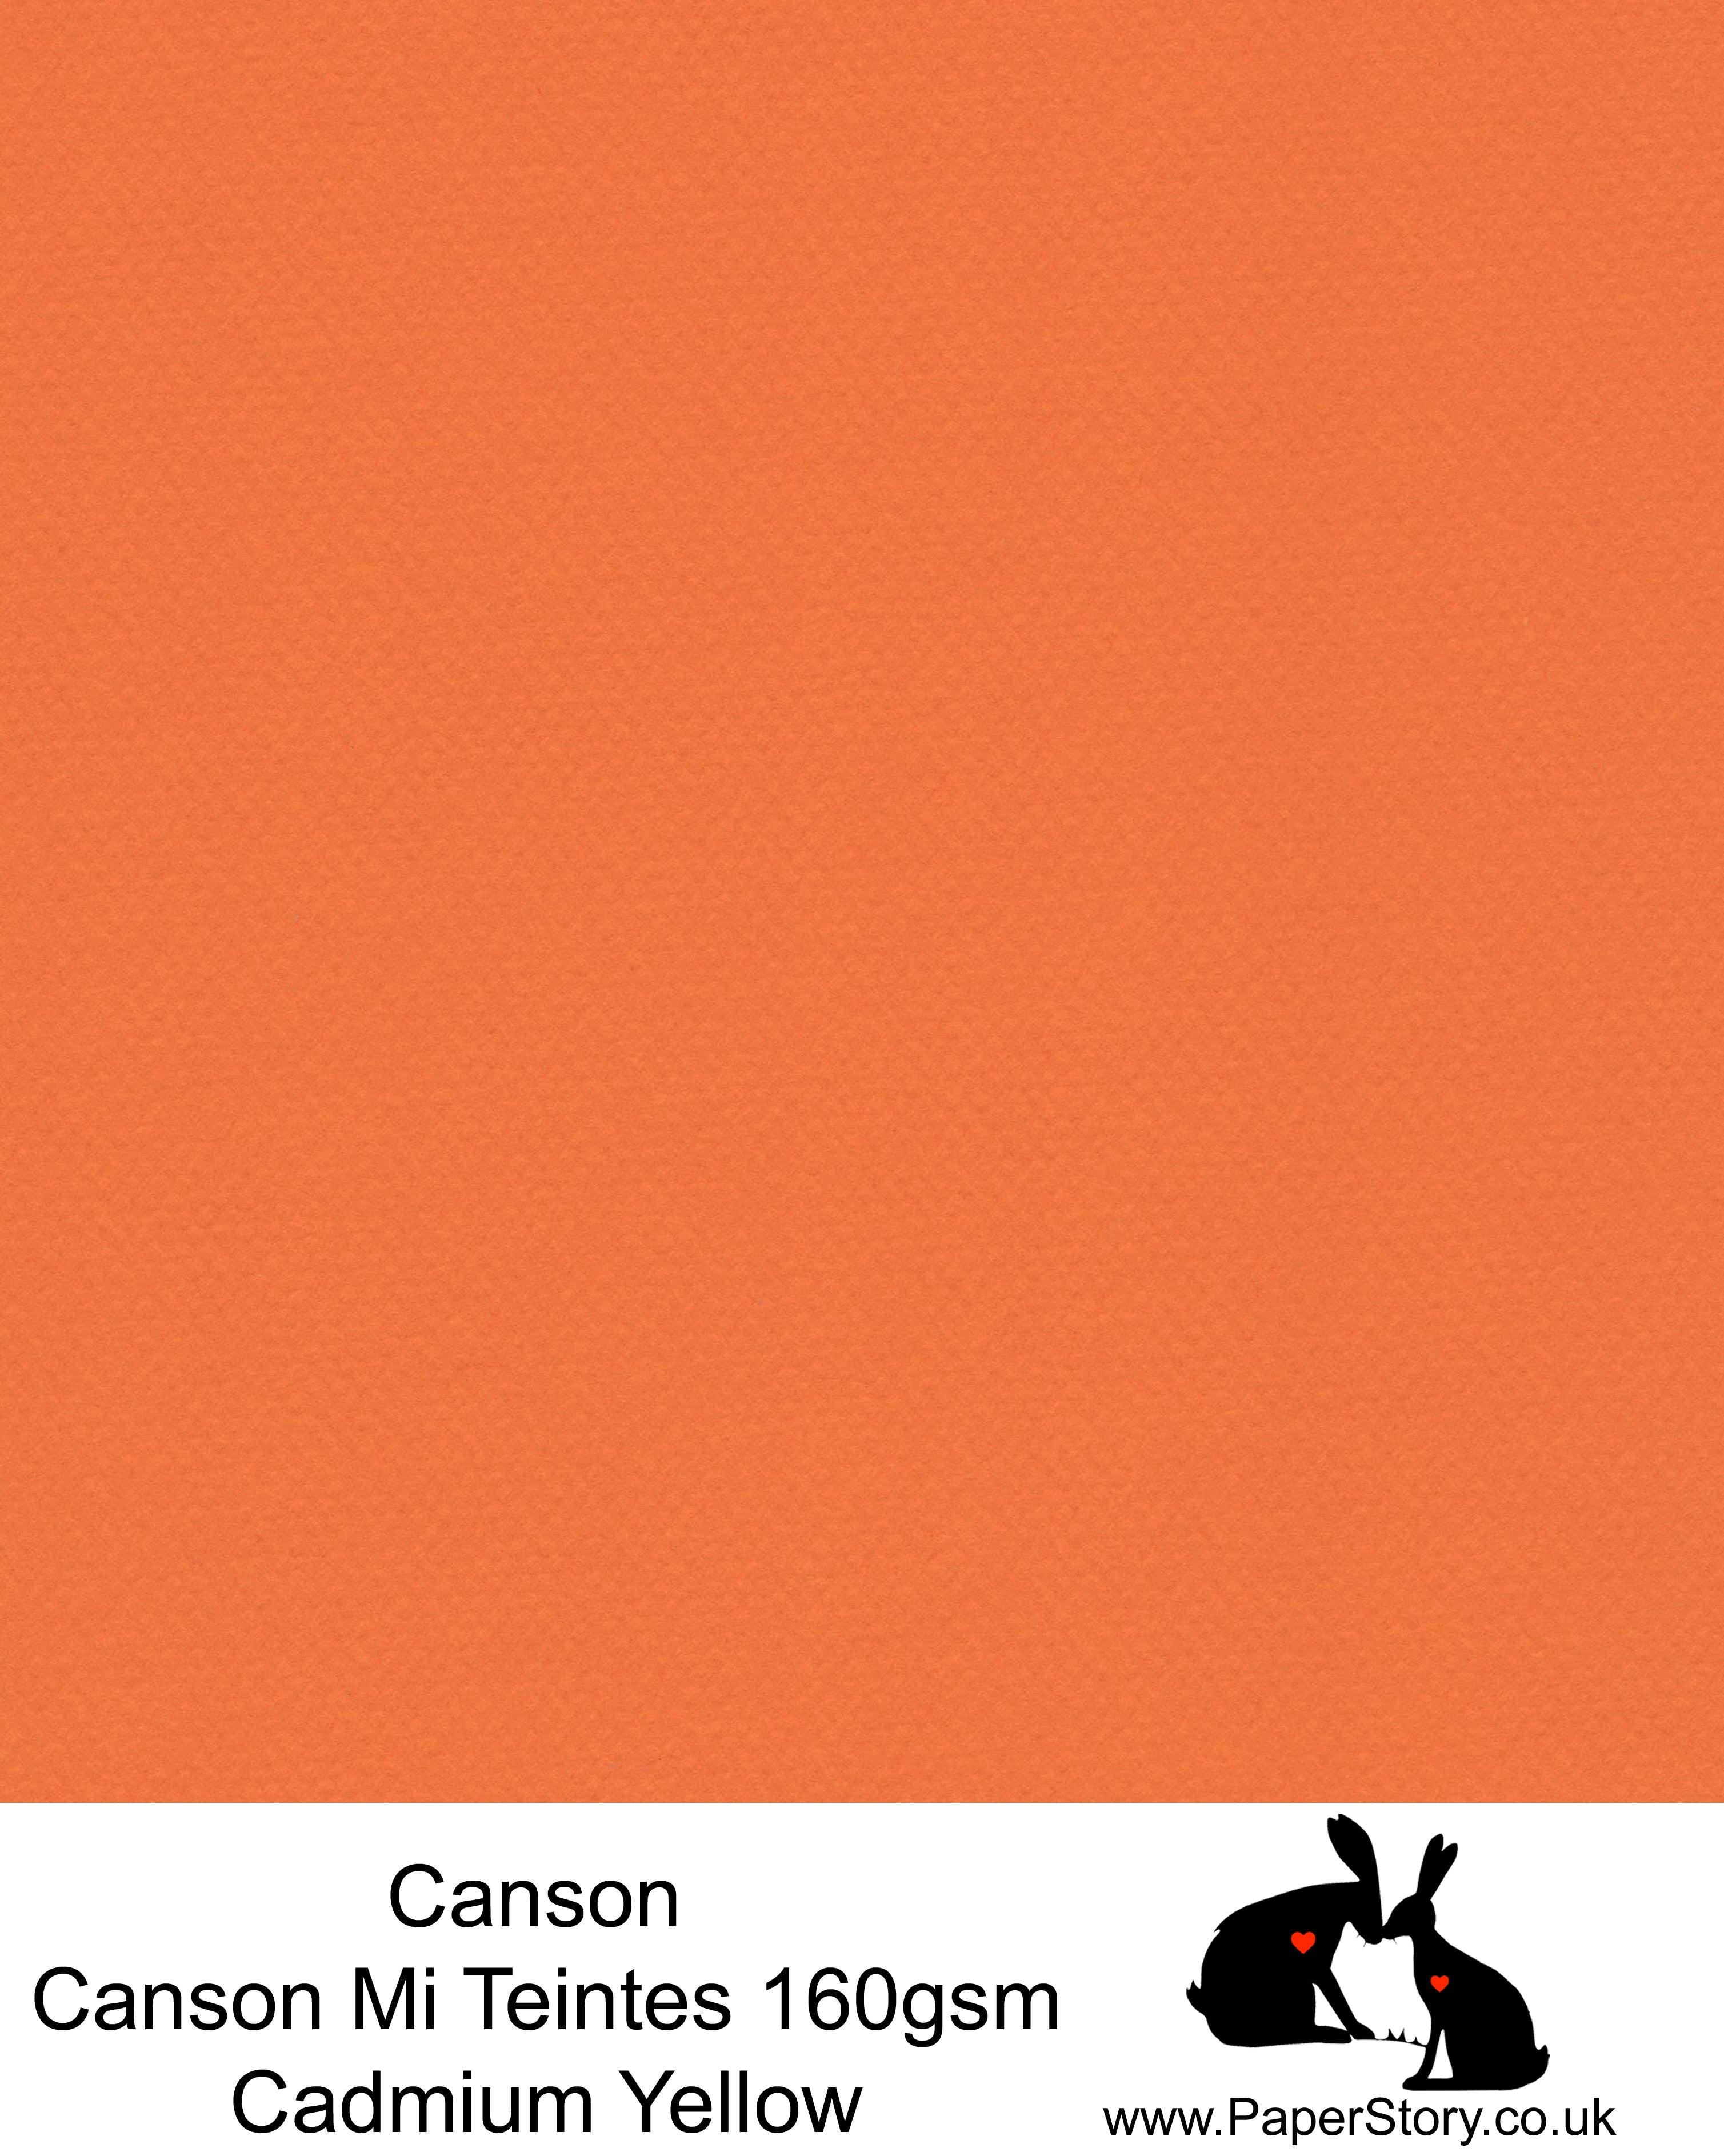 Canson Mi Teintes acid free, deep orange yellow hammered texture honeycomb surface paper 160 gsm. This is a popular and classic paper for all artists especially well respected for Pastel  and Papercutting made famous by Paper Panda. This paper has a honeycombed finish one side and fine grain the other. An authentic art paper, acid free with a  very high 50% cotton content. Canson Mi-Teintes complies with the ISO 9706 standard on permanence, a guarantee of excellent conservation 